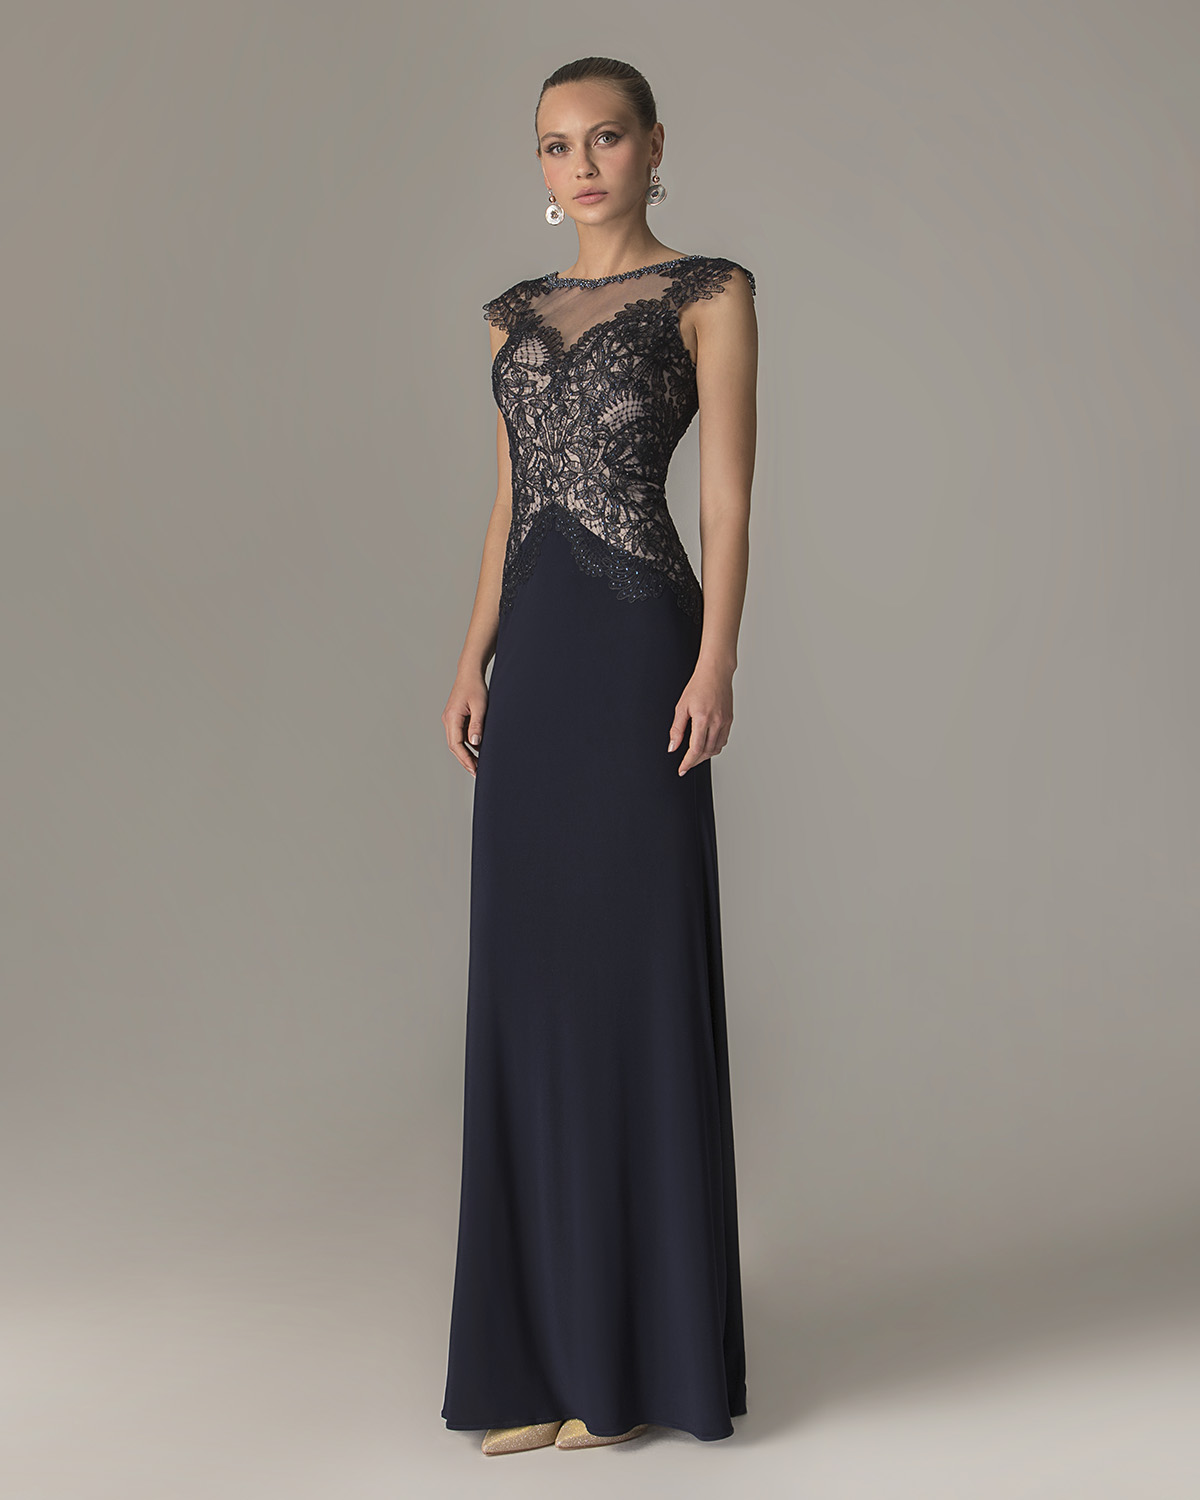 Classic Dresses / Long dress with a lace top for the mother of the bride